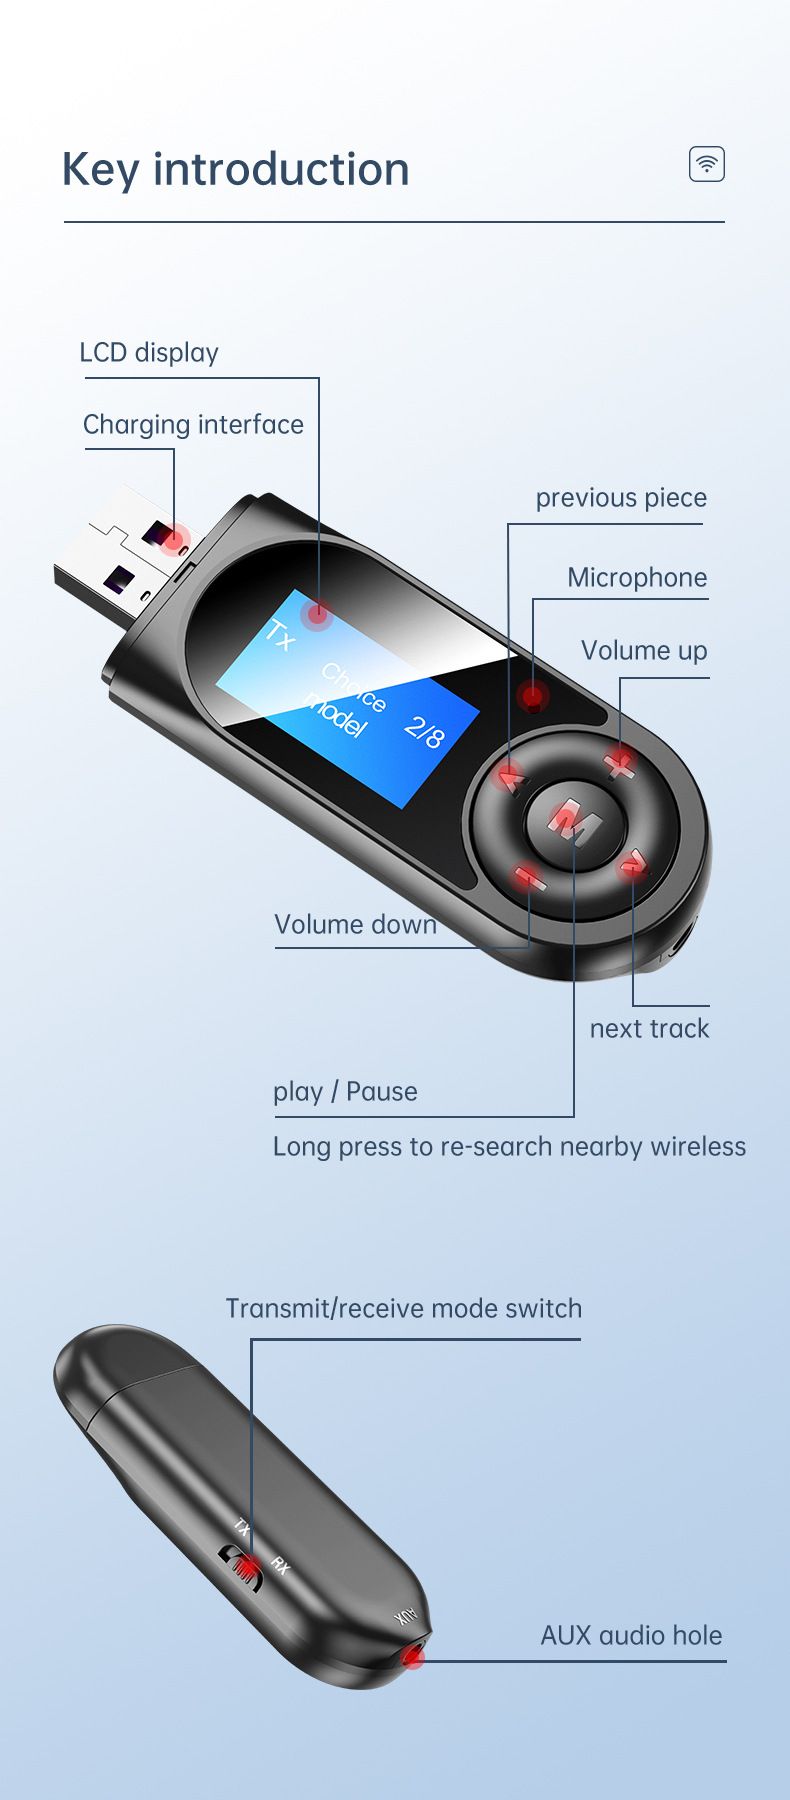 Bakeey-LCD-Digital-Display-bluetooth-Adapter-Hands-free-Call-Stereo-bluetooth-Receiver-Transmitter-F-1716593